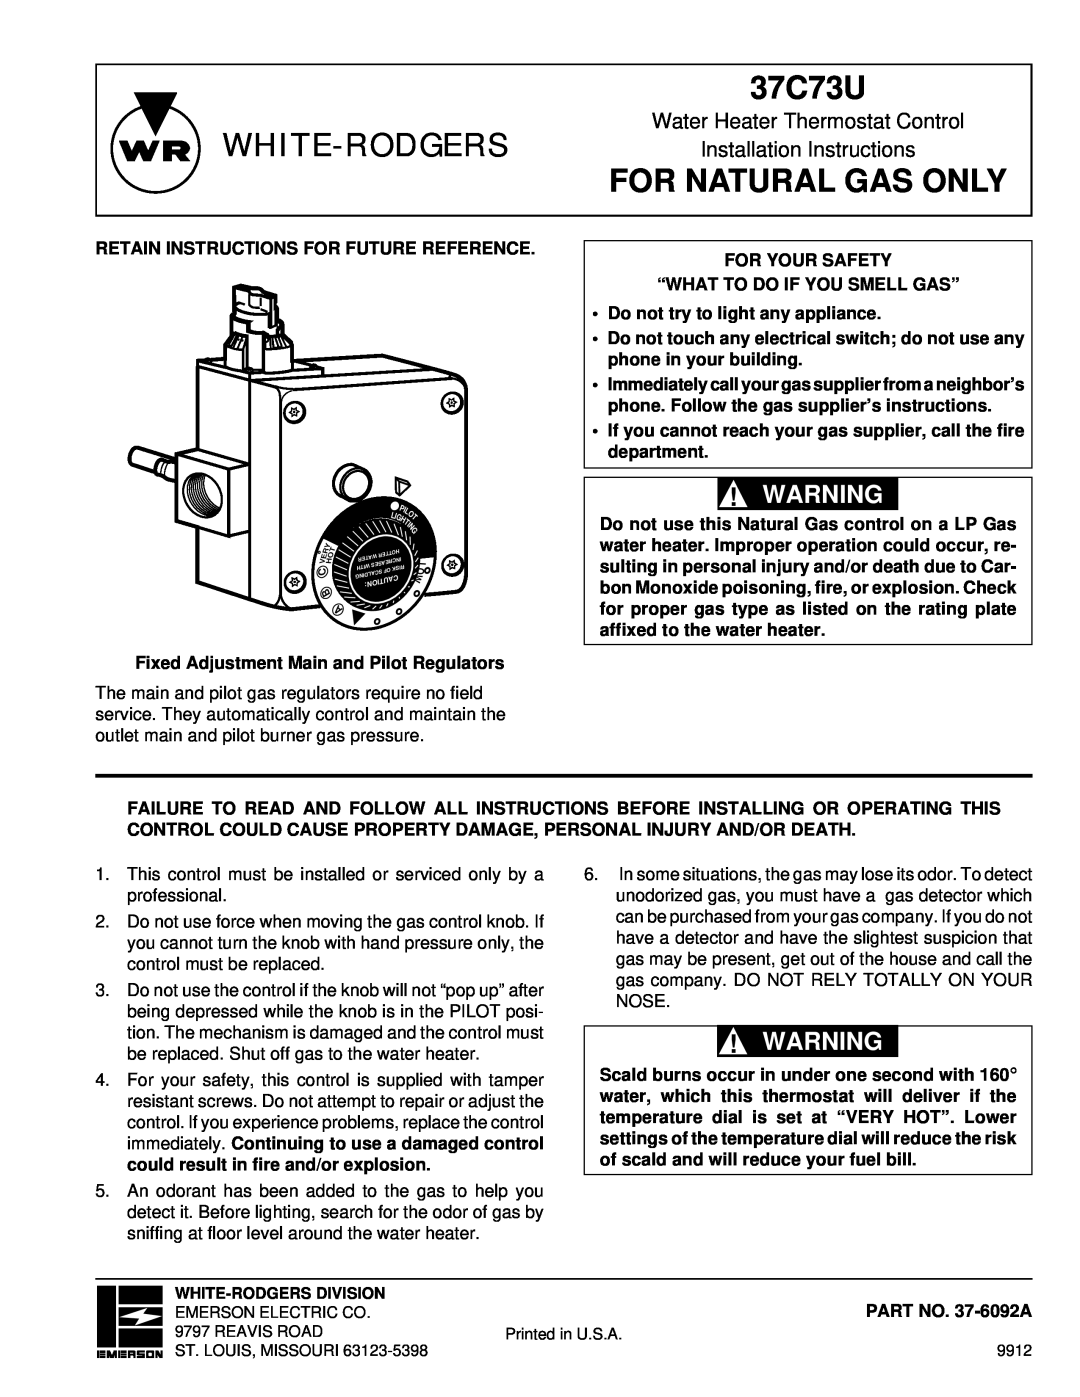 White Rodgers 37C73U installation instructions PART NO. 37-7202A, For Natural Gas Only 